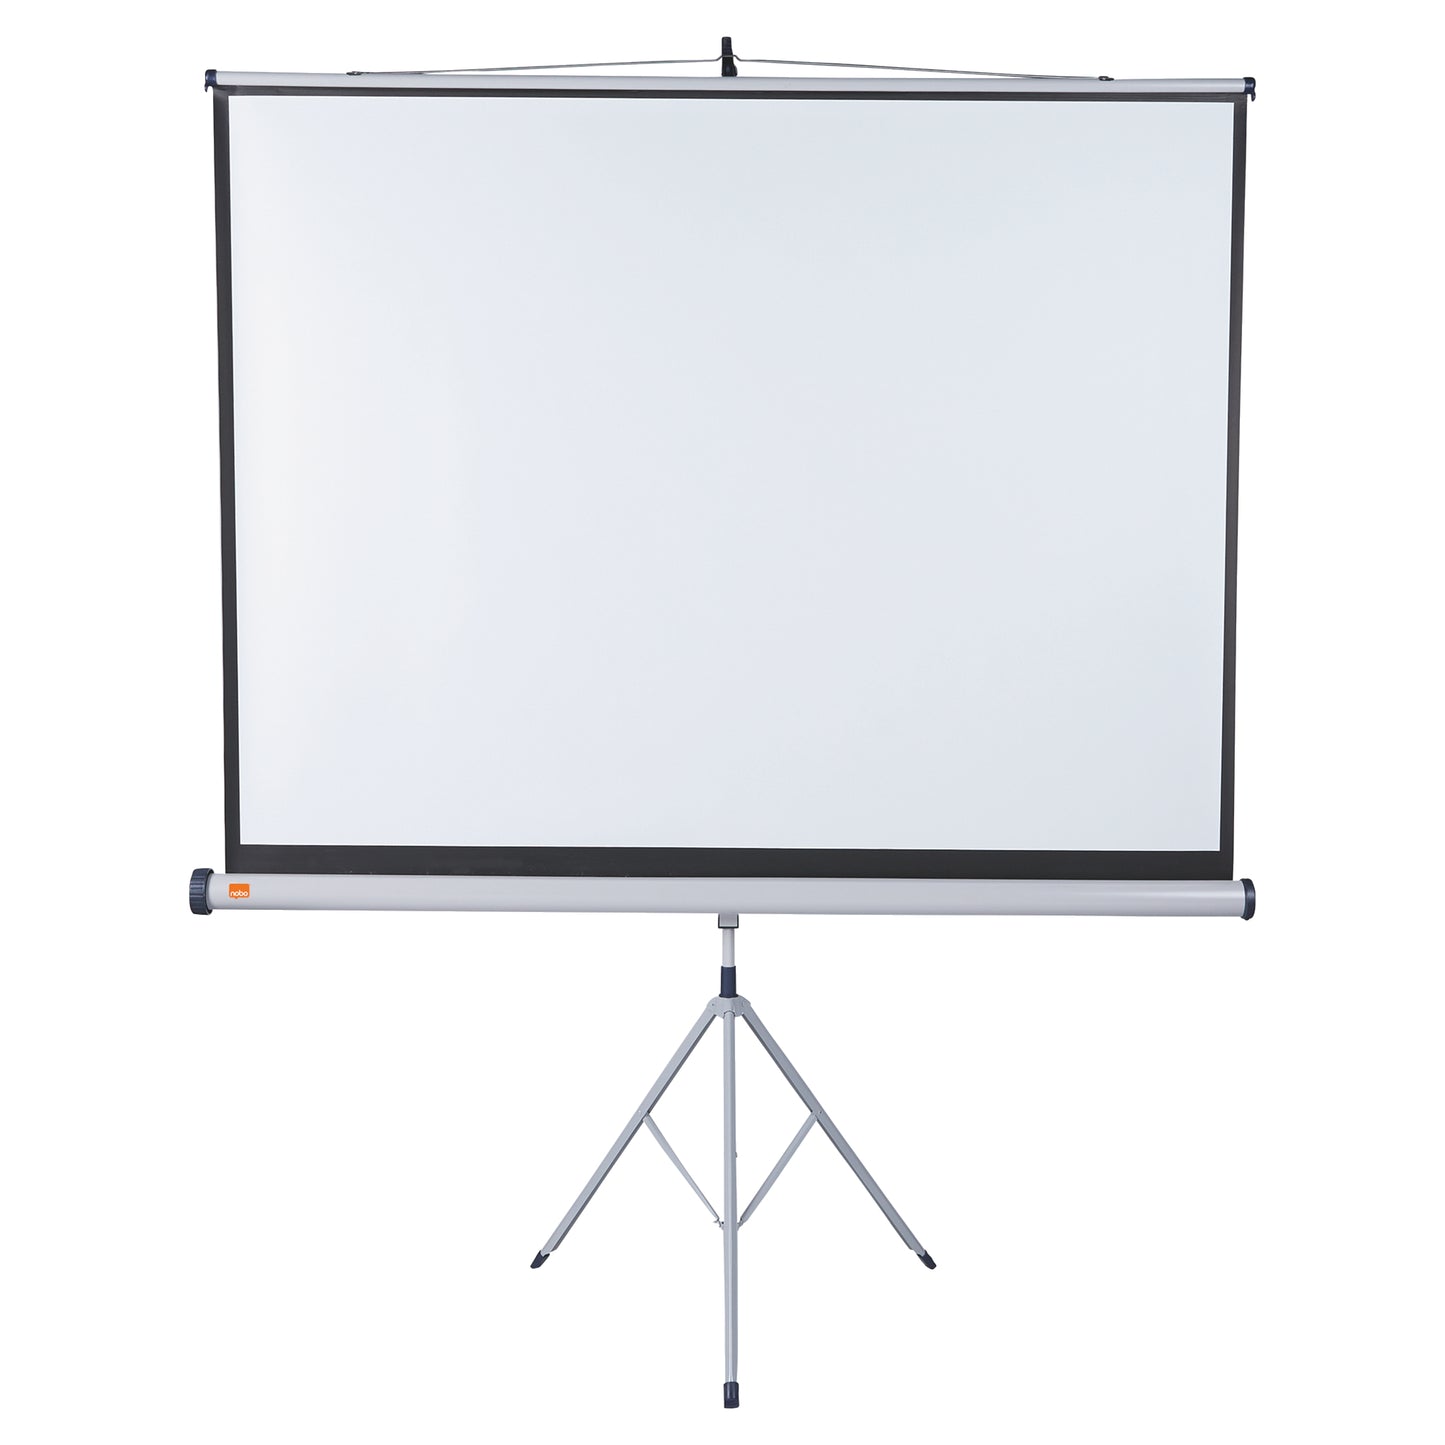 Nobo Tripod Widescreen Projection Screen 2000x1310mm 1902397W - NWT FM SOLUTIONS - YOUR CATERING WHOLESALER